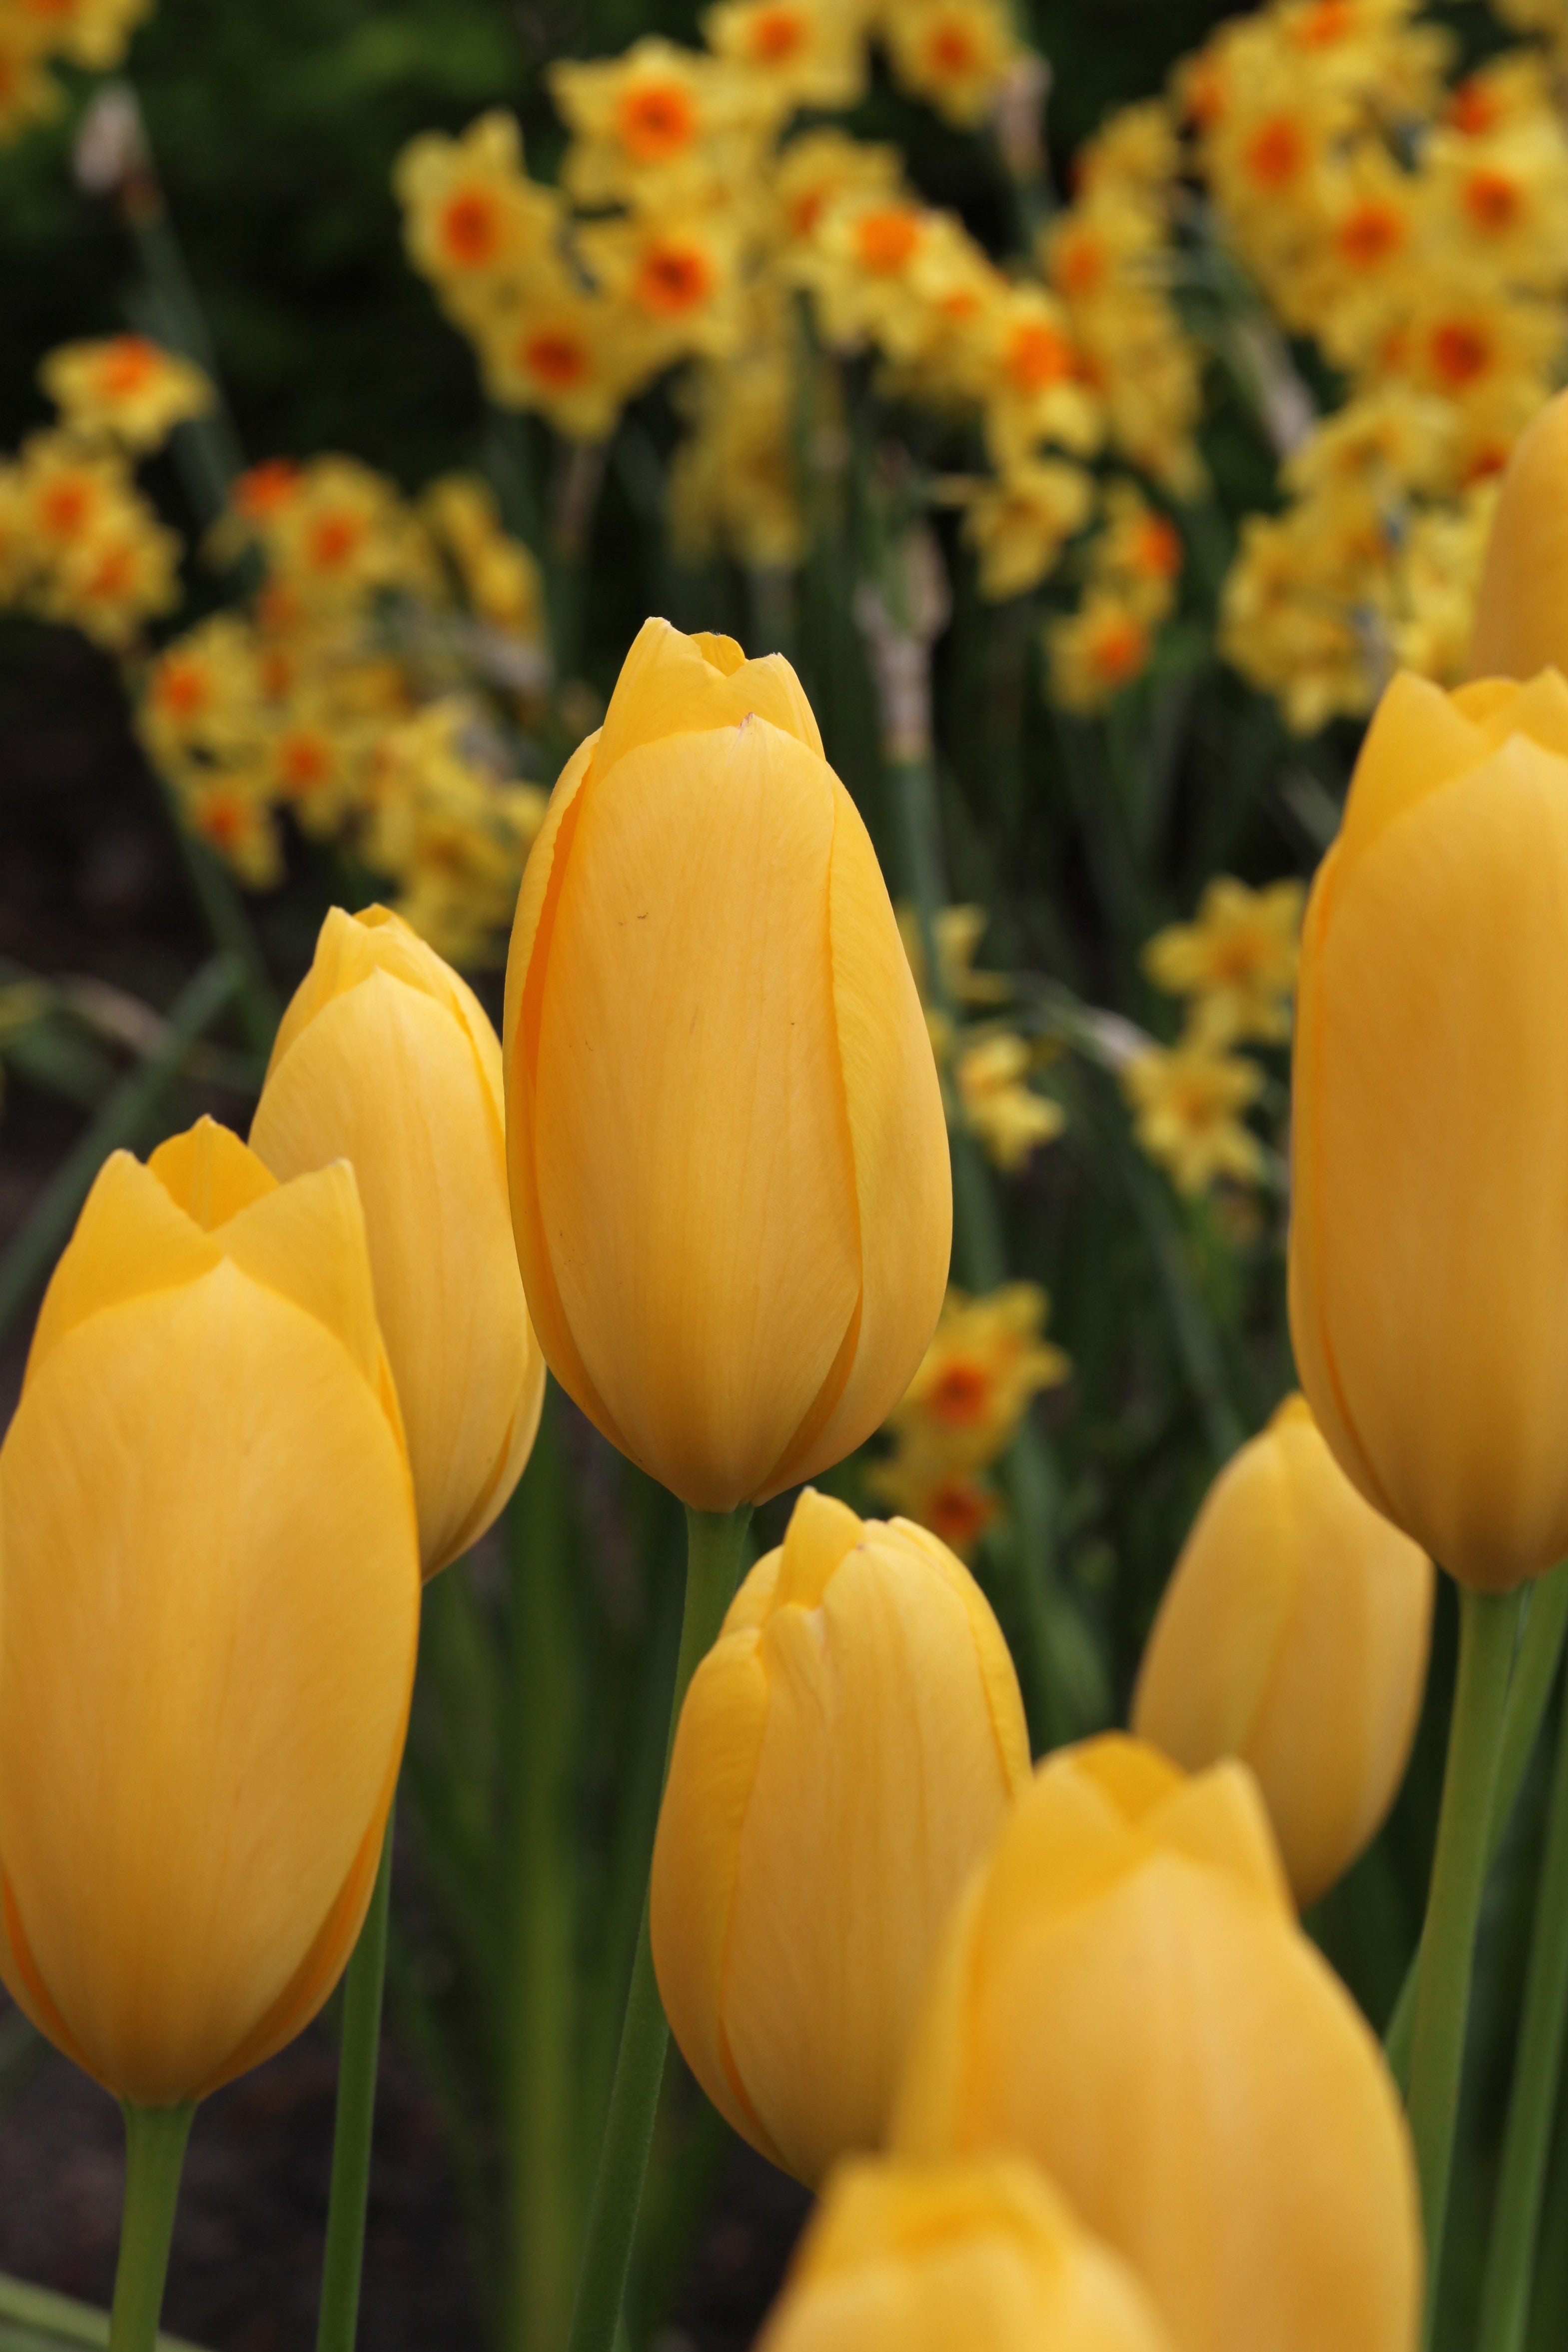 Close-up of Single late tulip Muscadet, with golden-yellow blooms